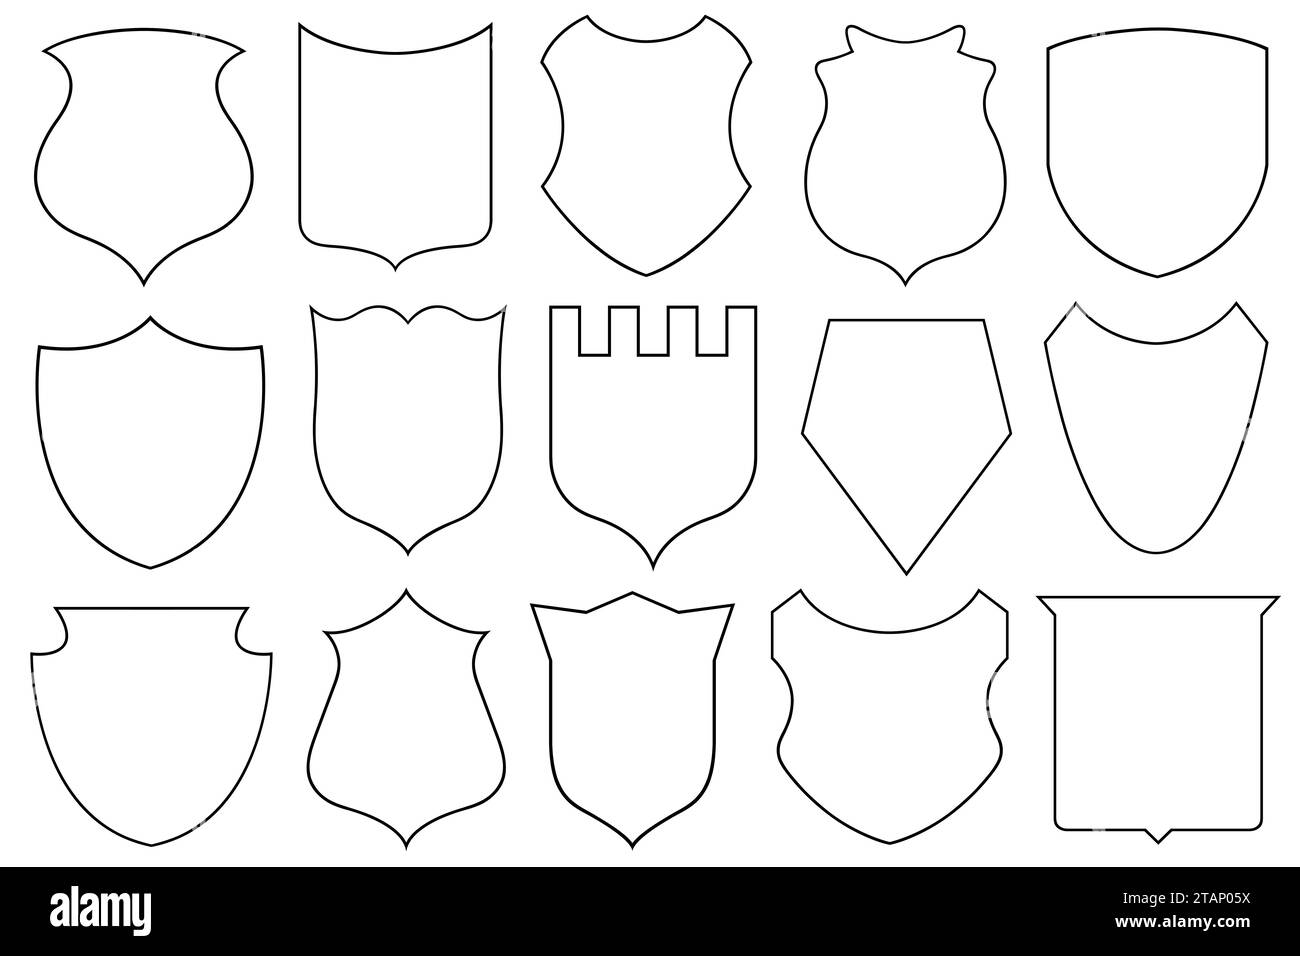 Illustration of different shields isolated on white background Stock Photo